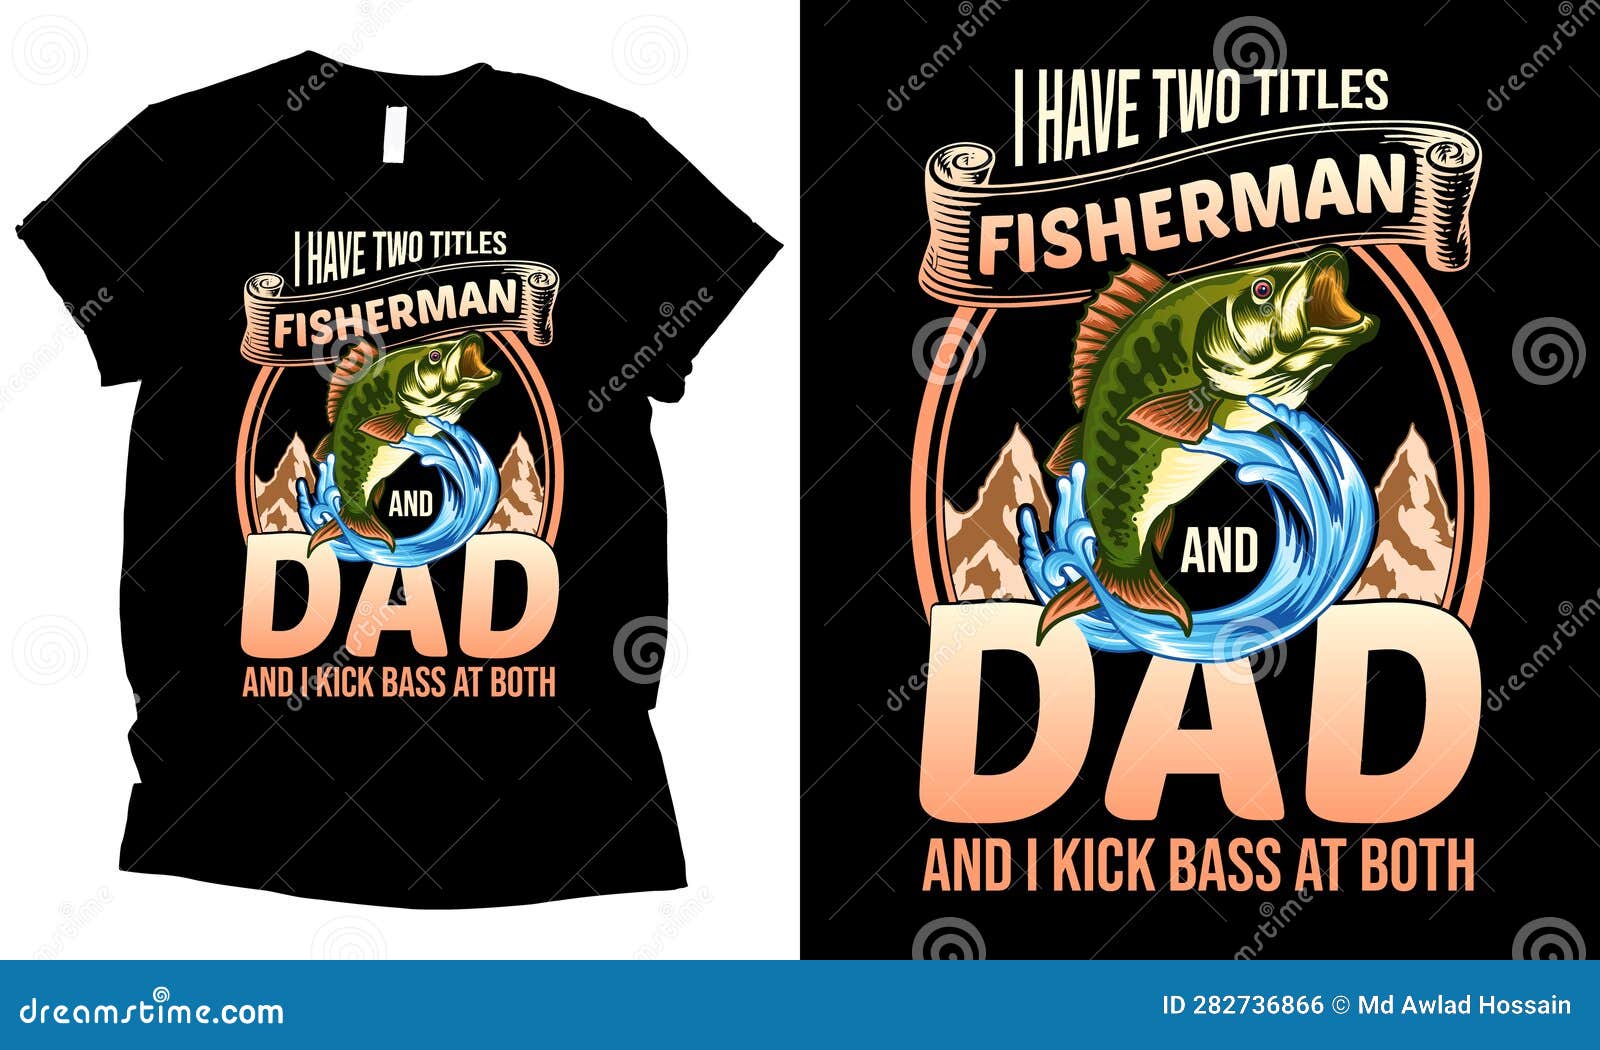 I Have Two Titles Fisherman and Dad and I Kick Bass at Both. Fishing Dad  T-shirt Design Stock Vector - Illustration of design, person: 282736866